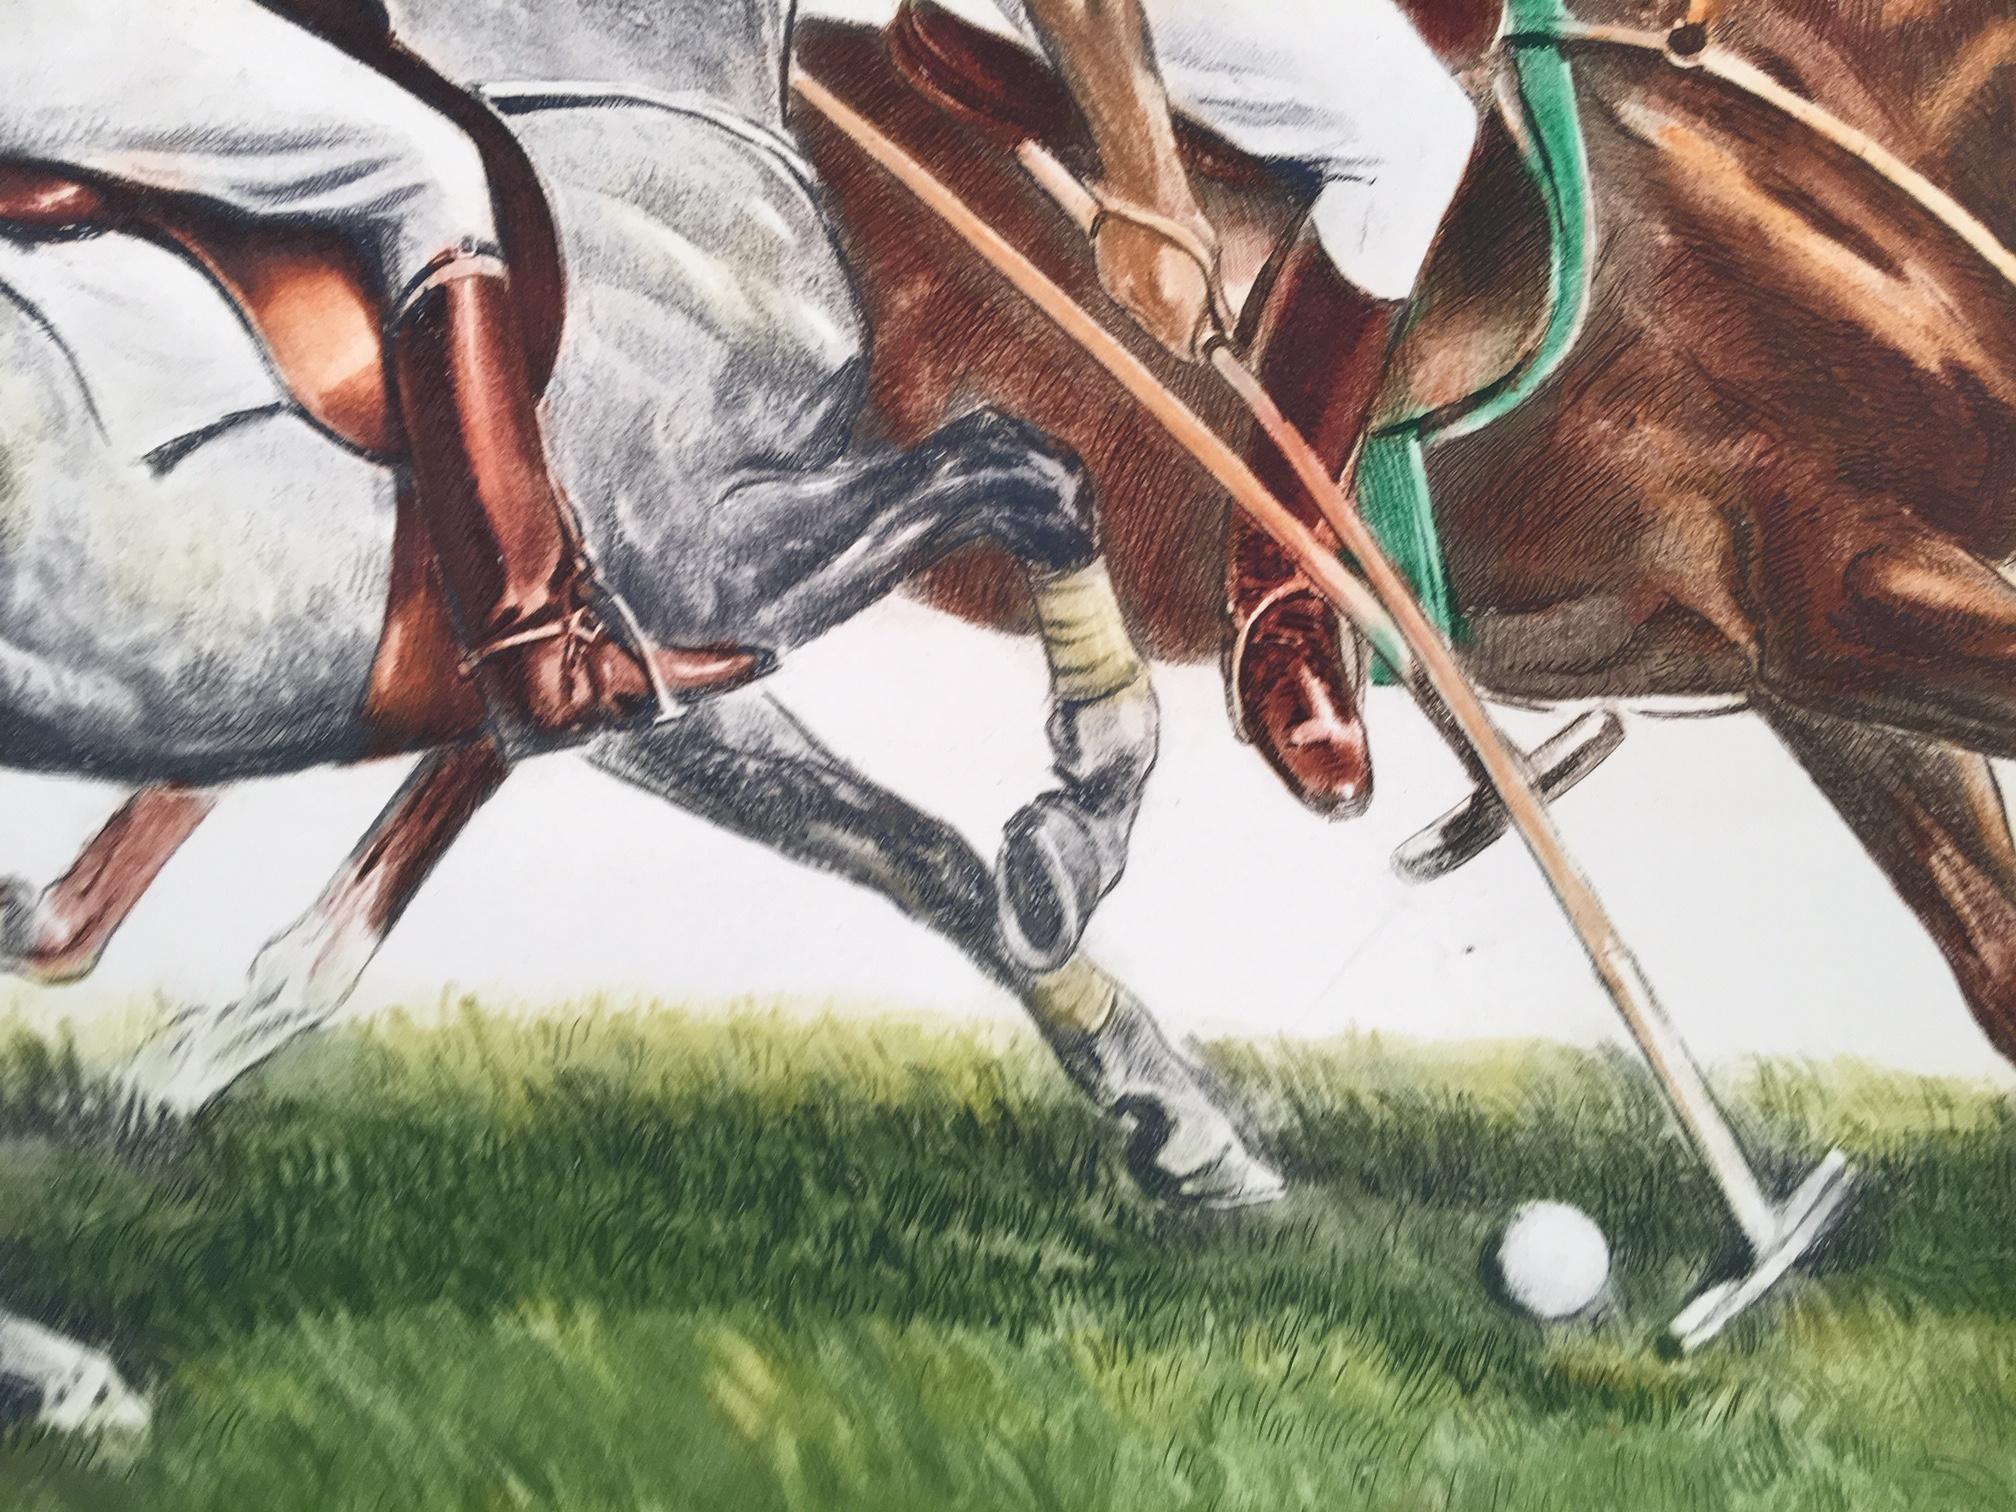 Polo Riders in Duel for the Ball - Print by Louis Claude